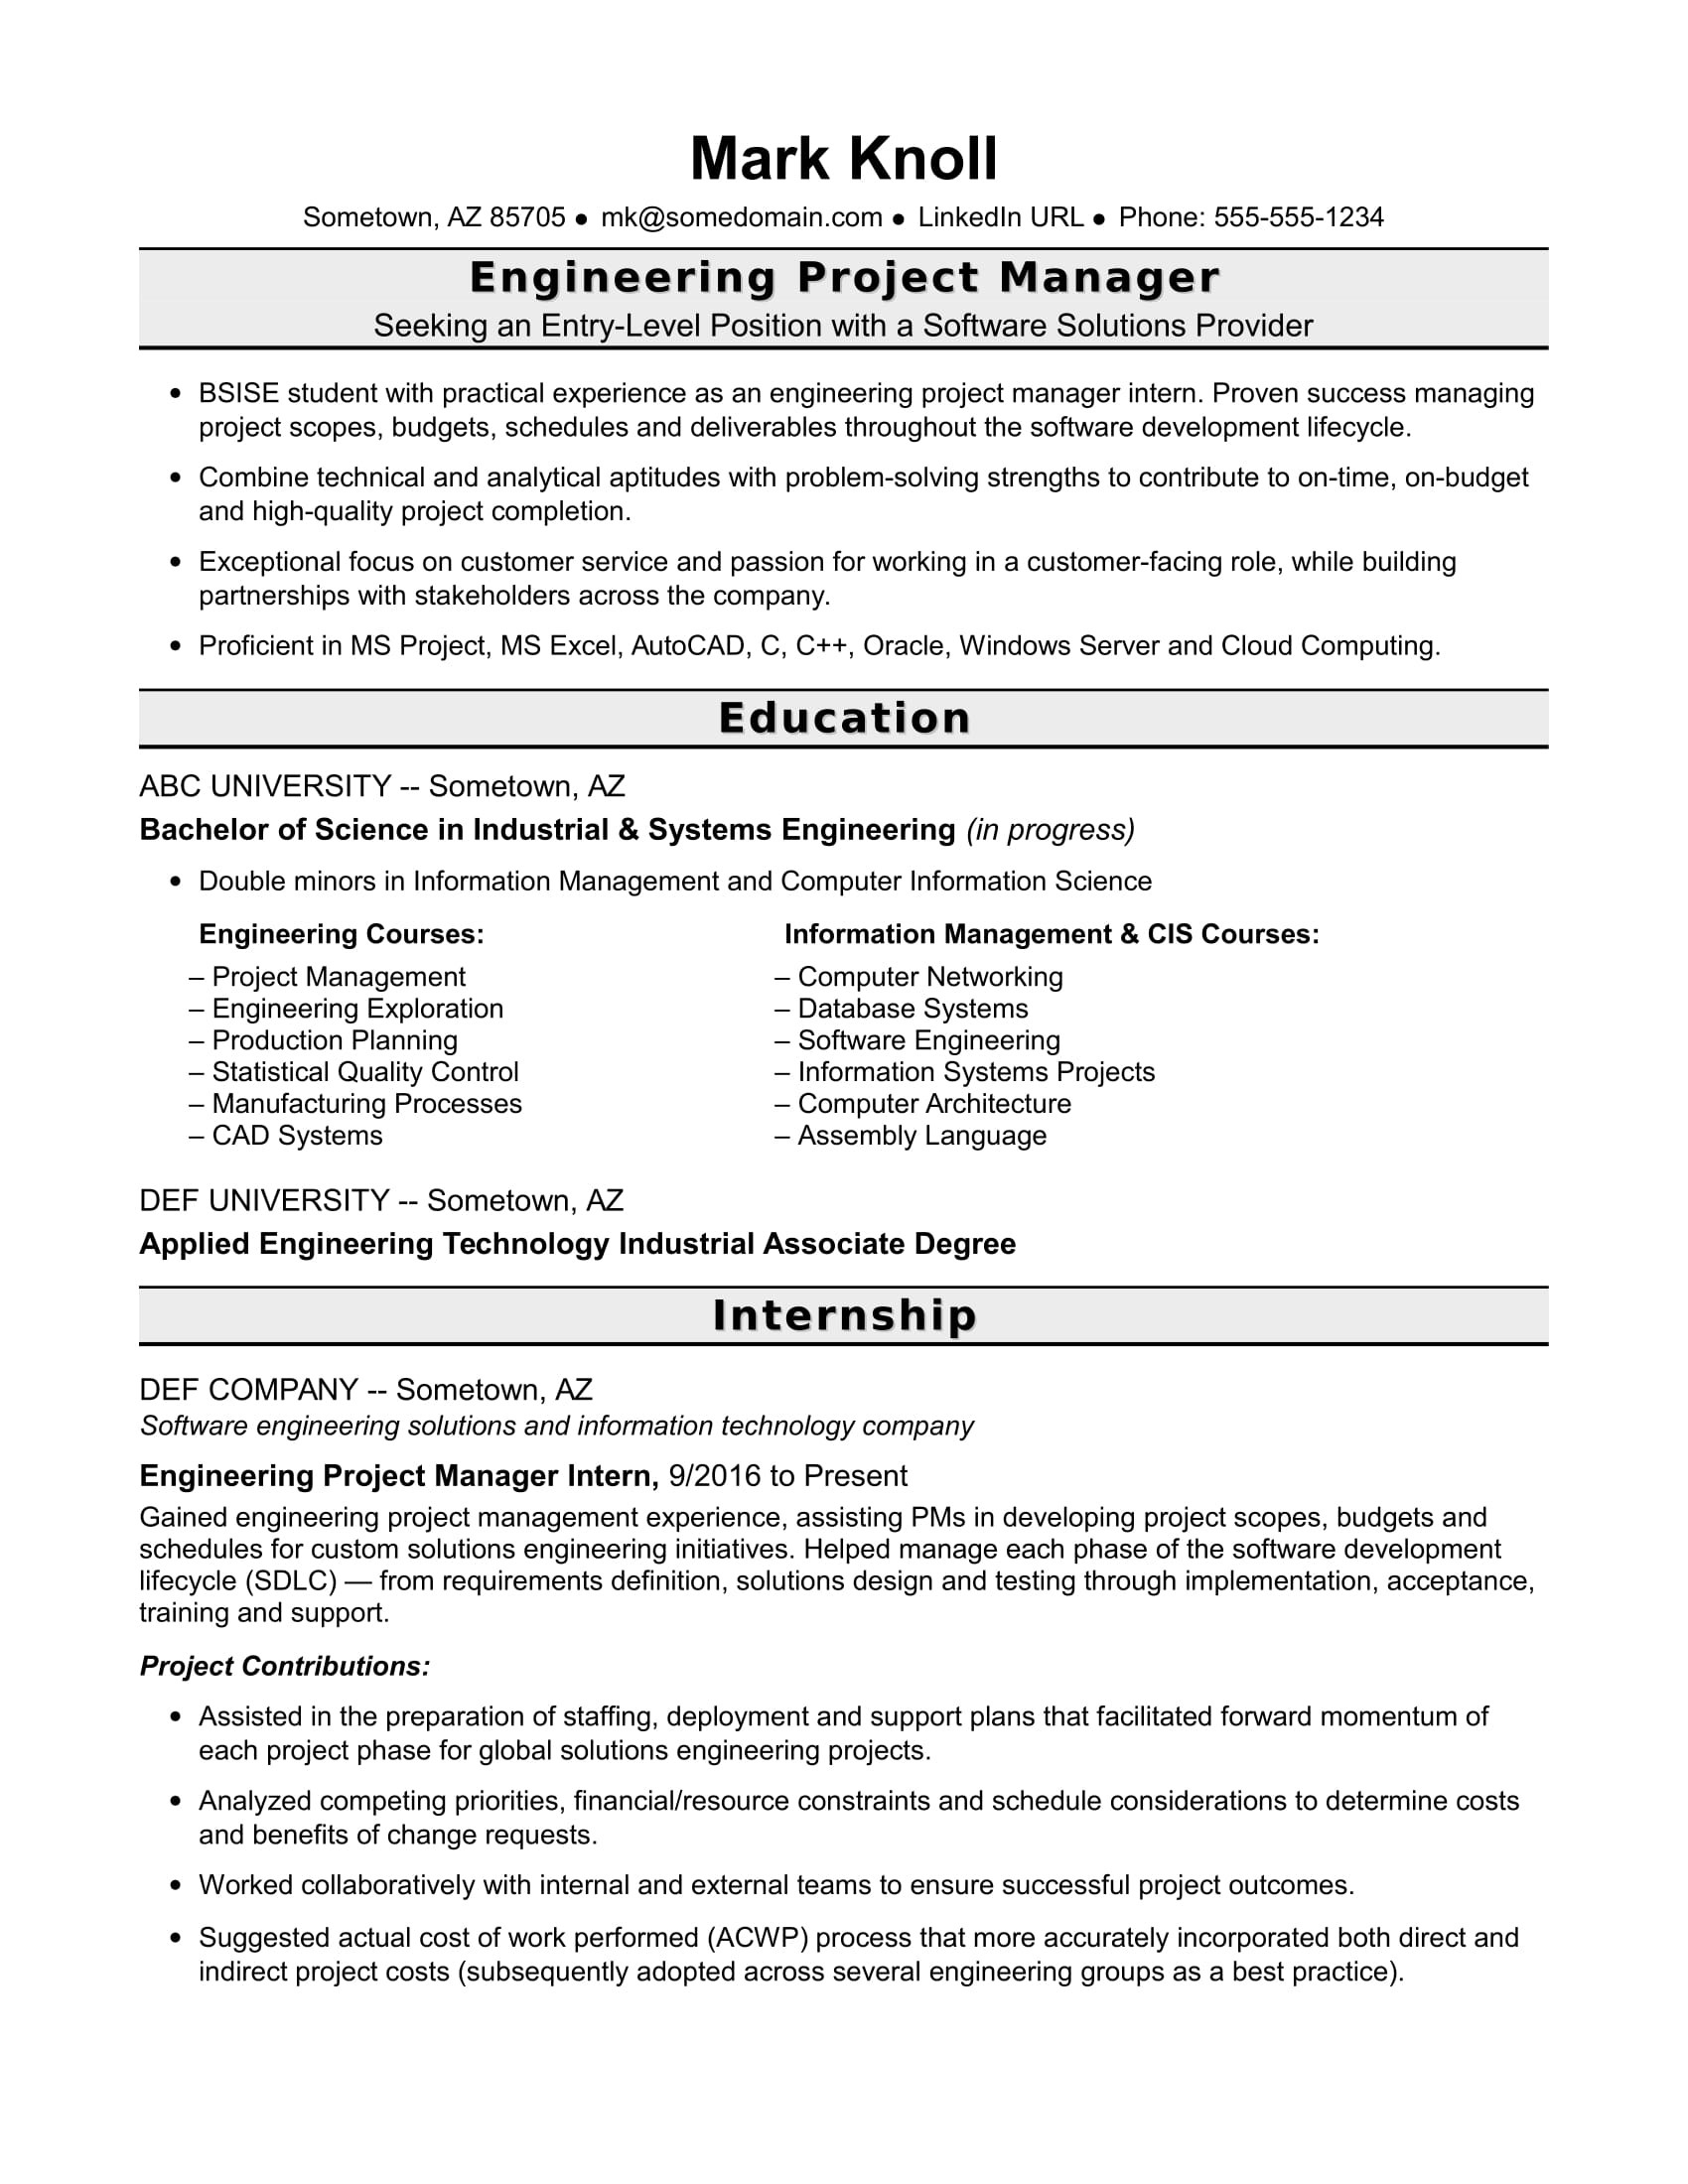 sample resume engineering project manager entry level